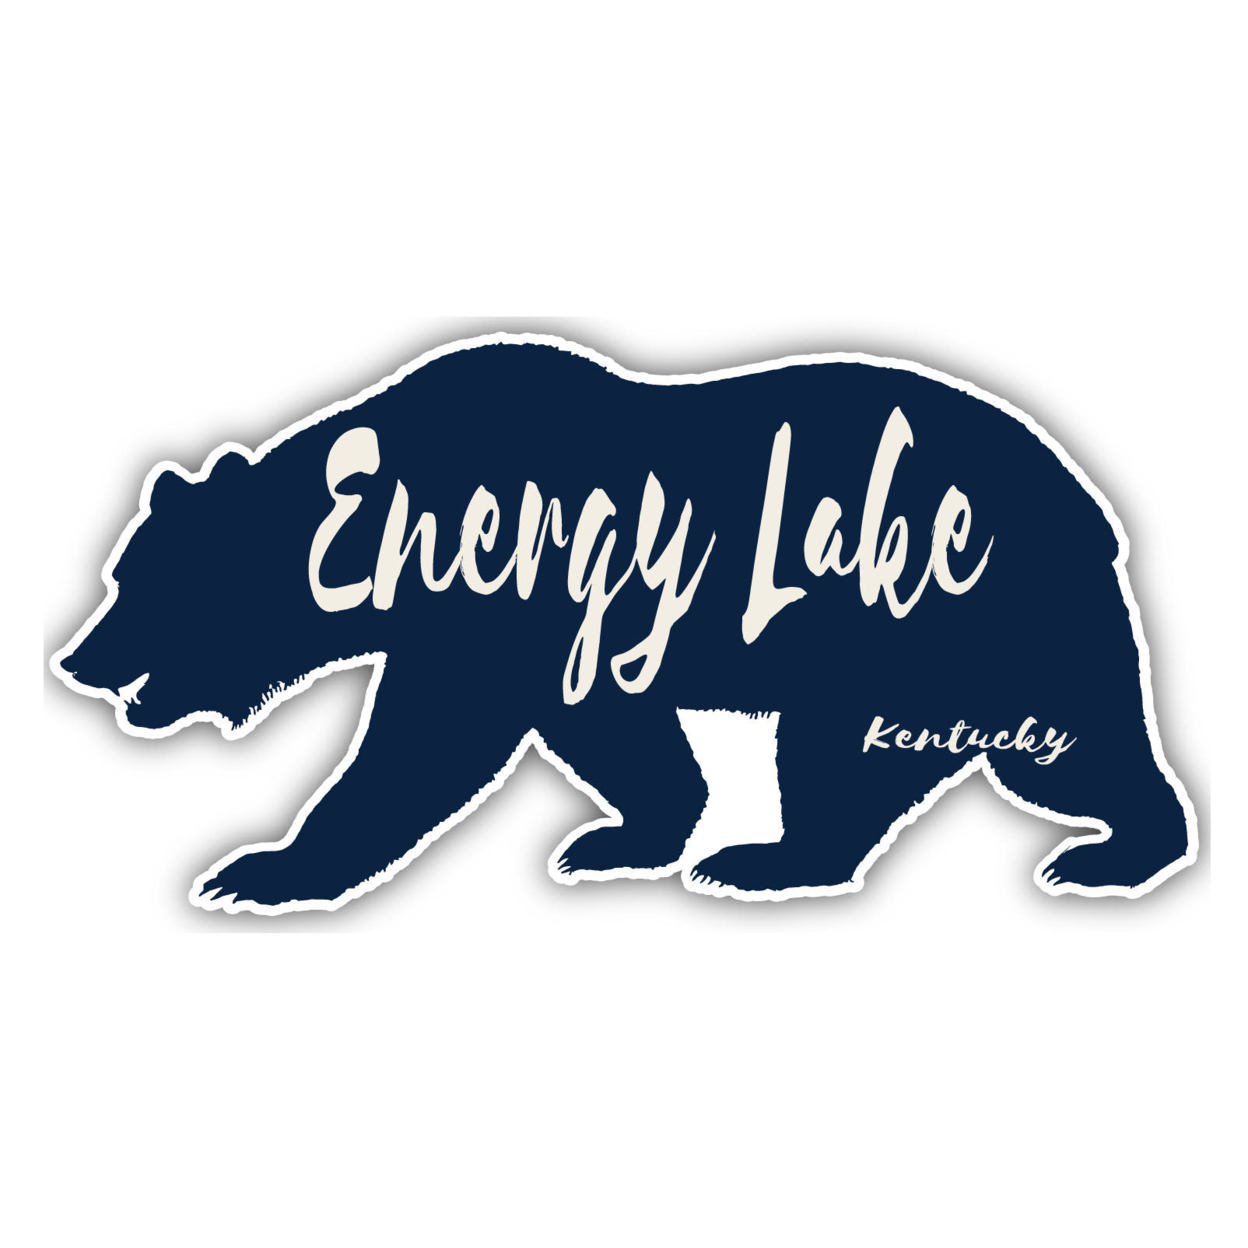 Energy Lake Kentucky Souvenir Decorative Stickers (Choose Theme And Size) - 4-Pack, 4-Inch, Bear